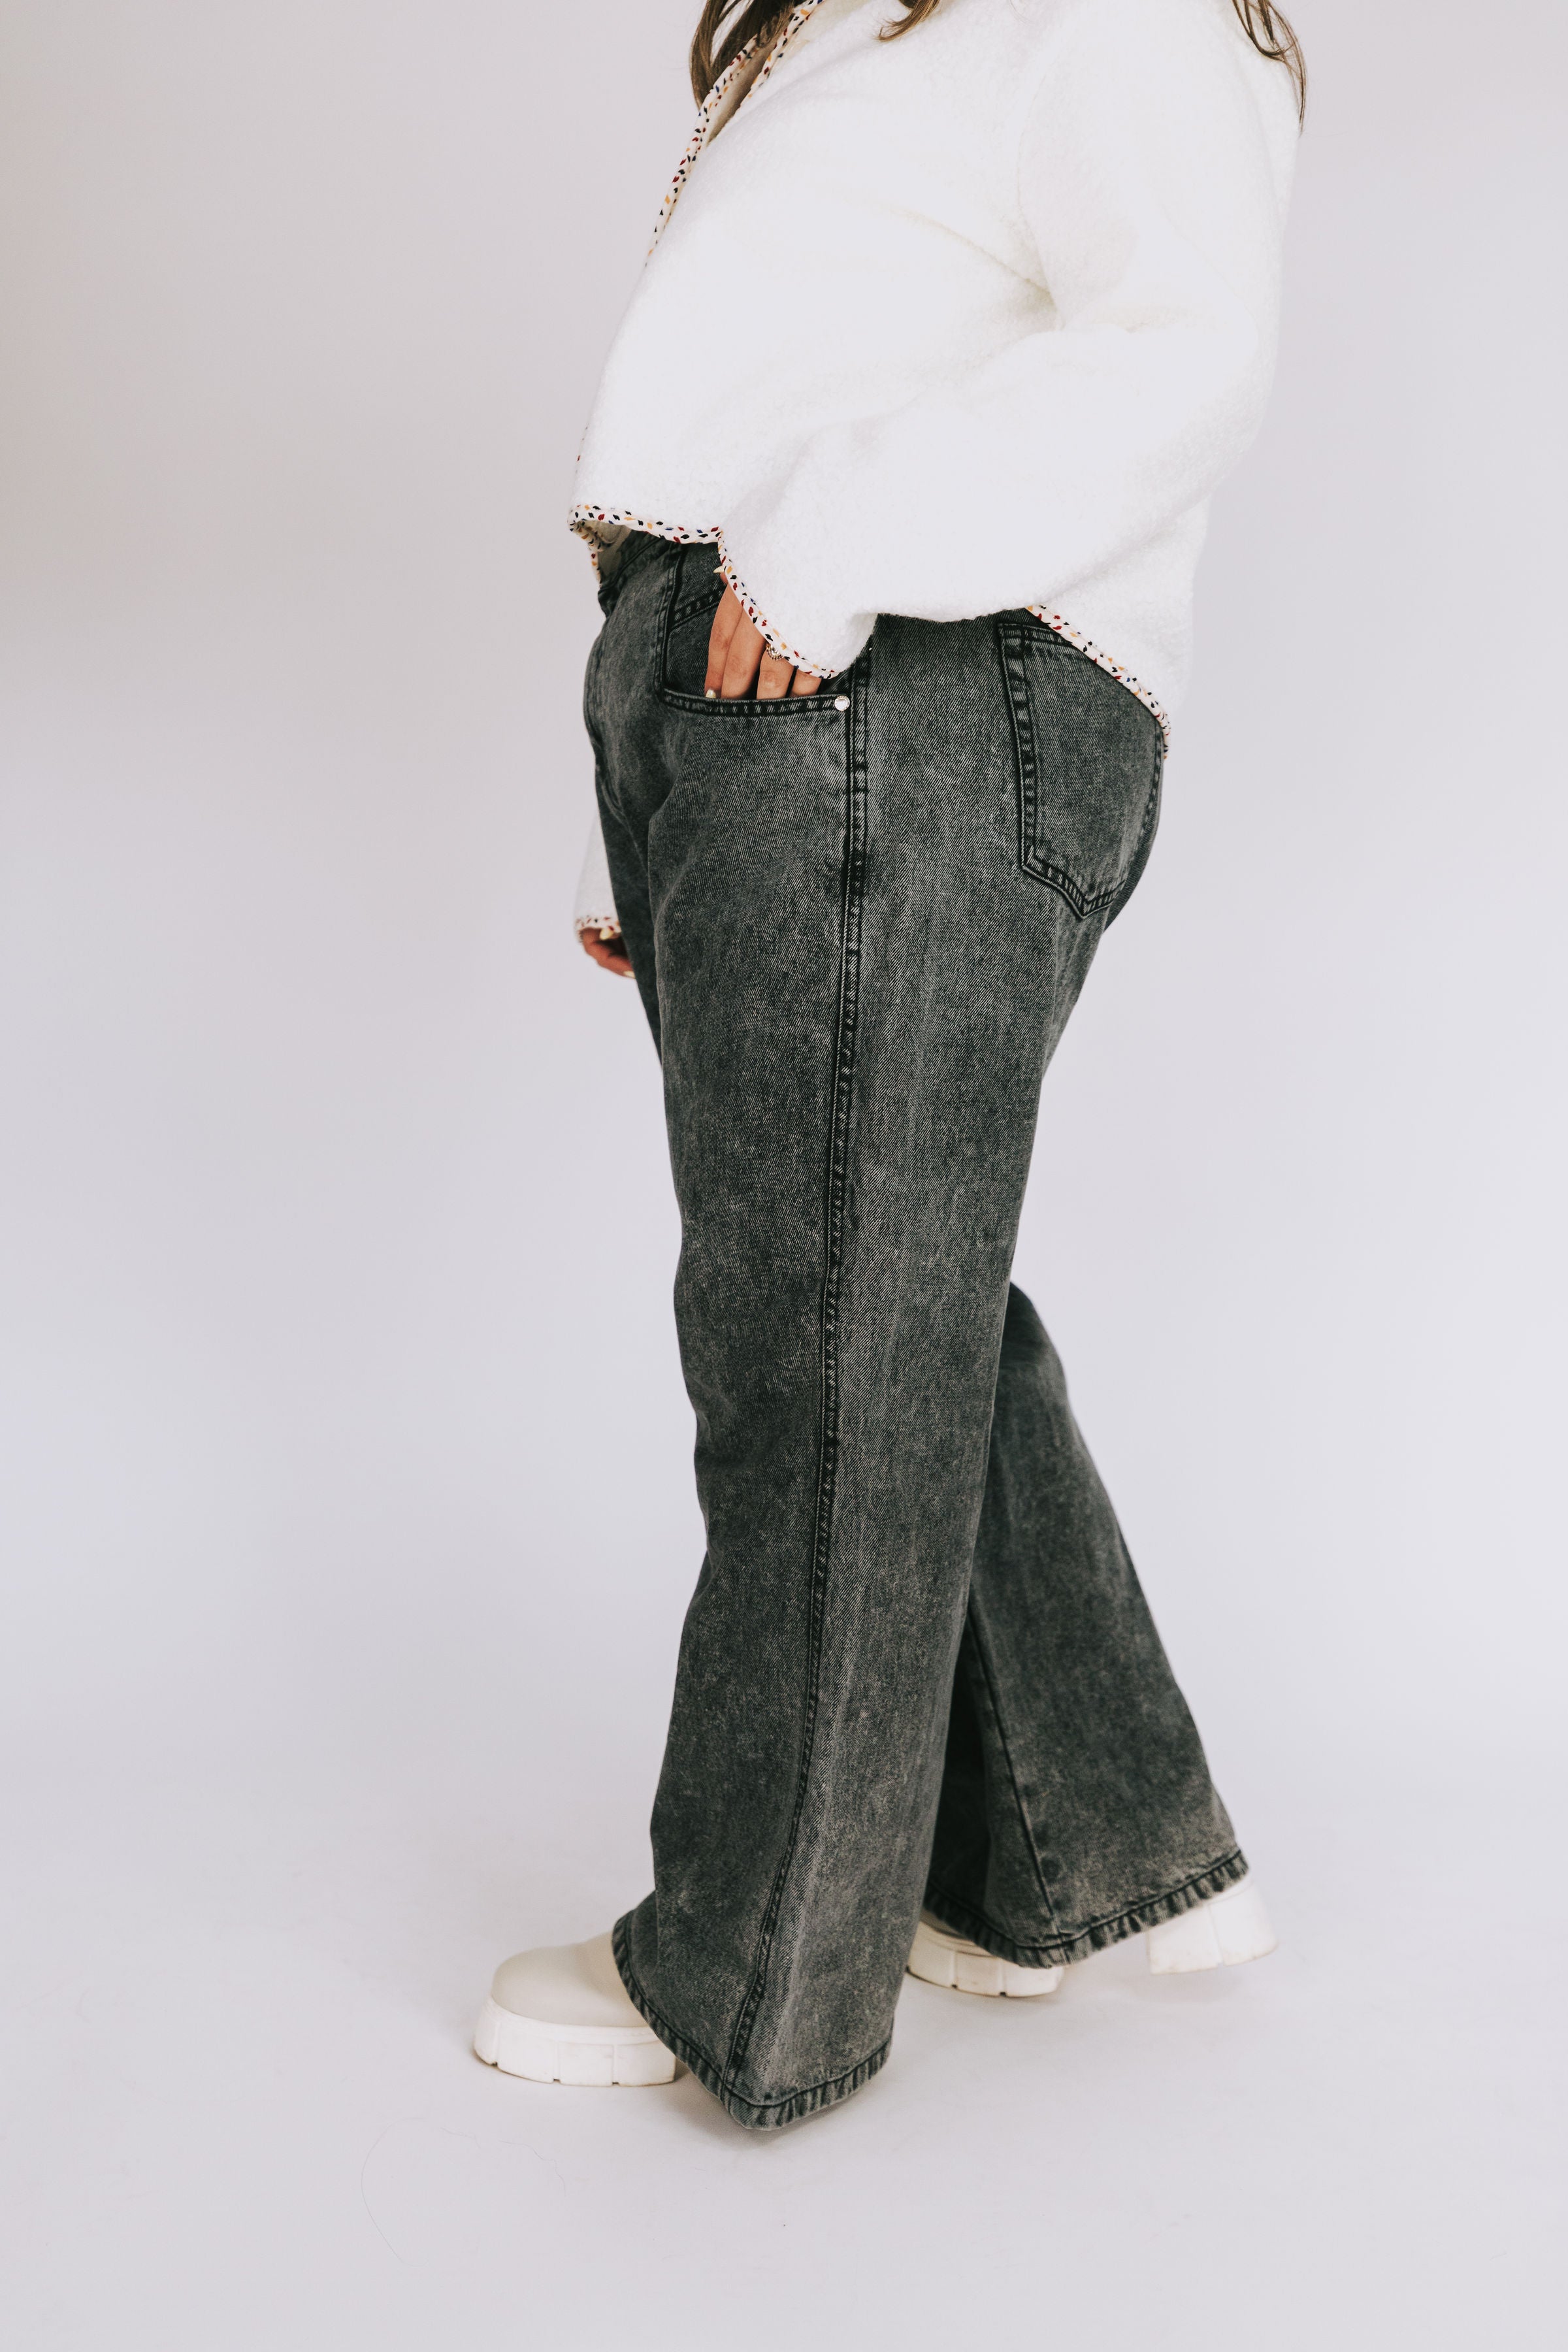 PLUS SIZE - All The Time Jeans